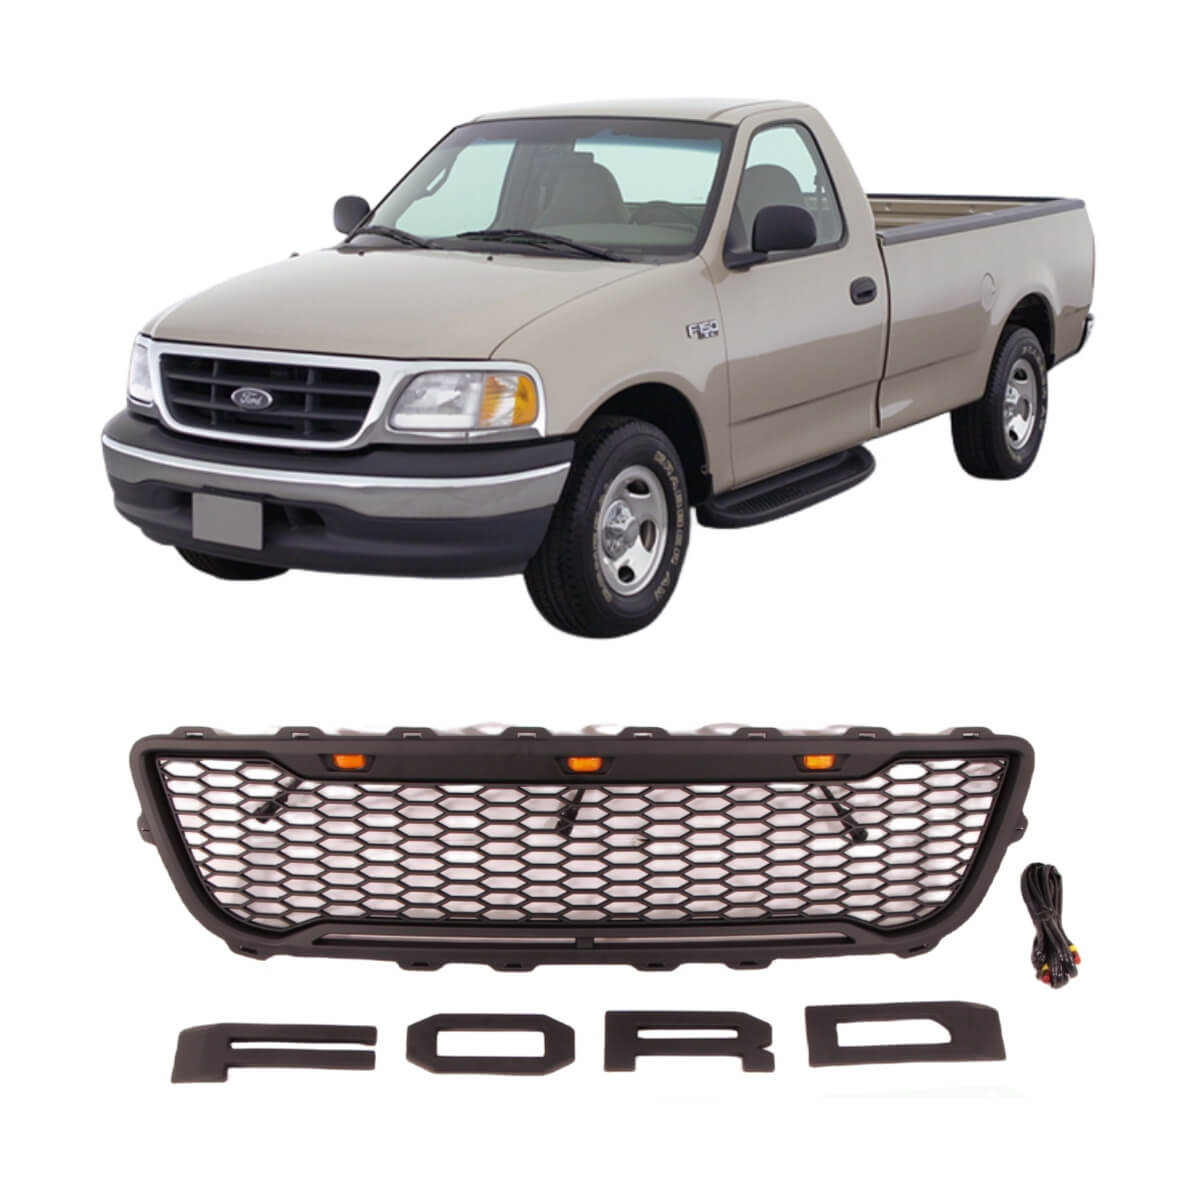 Ford F150 Grill 1999 2000 2001 2002 2003